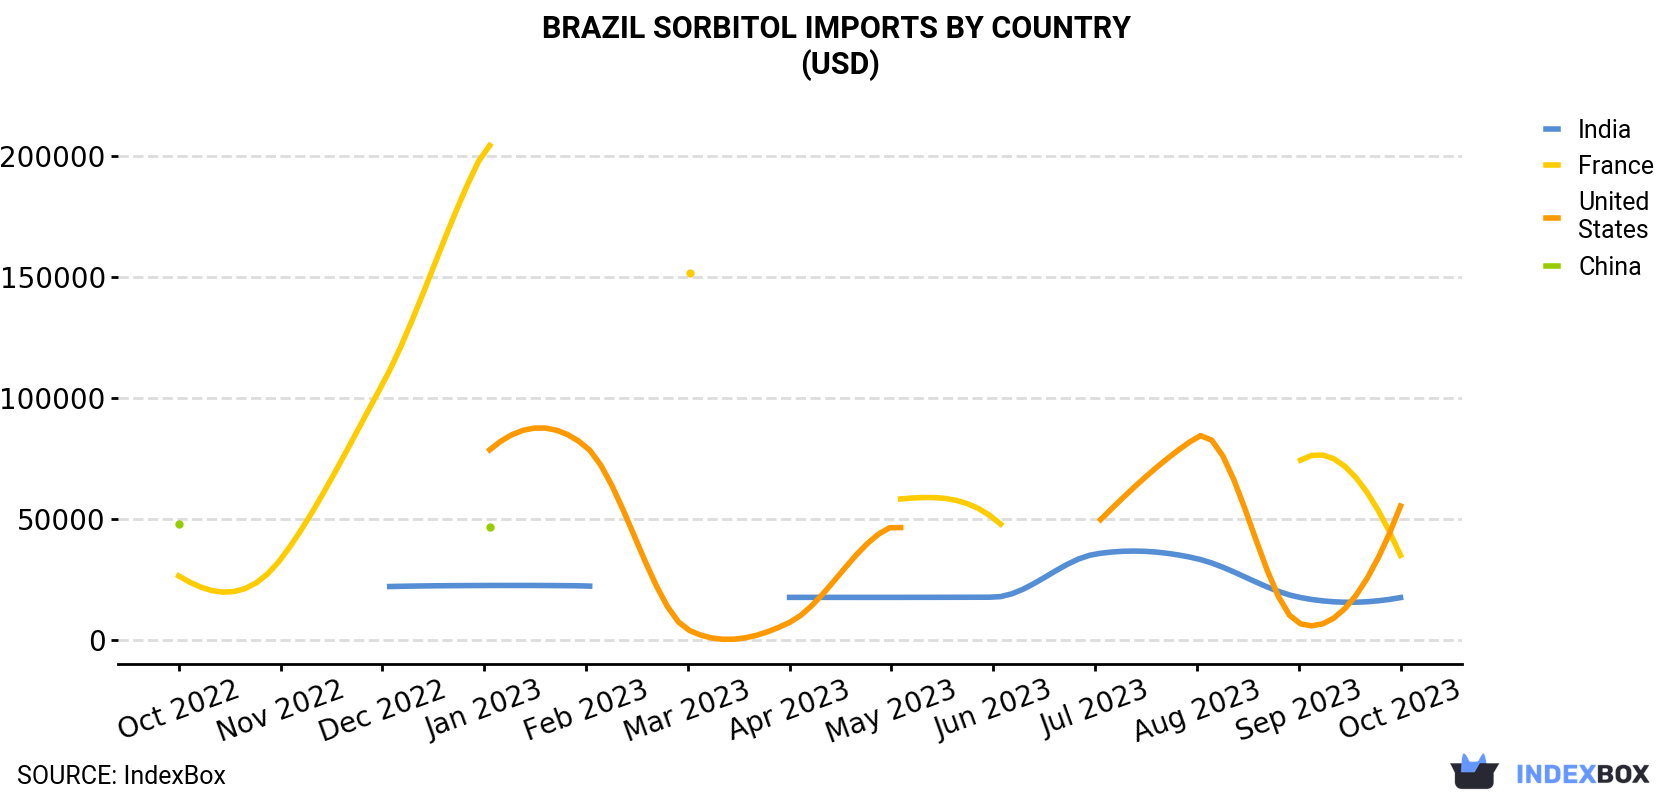 Brazil Sorbitol Imports By Country (USD)